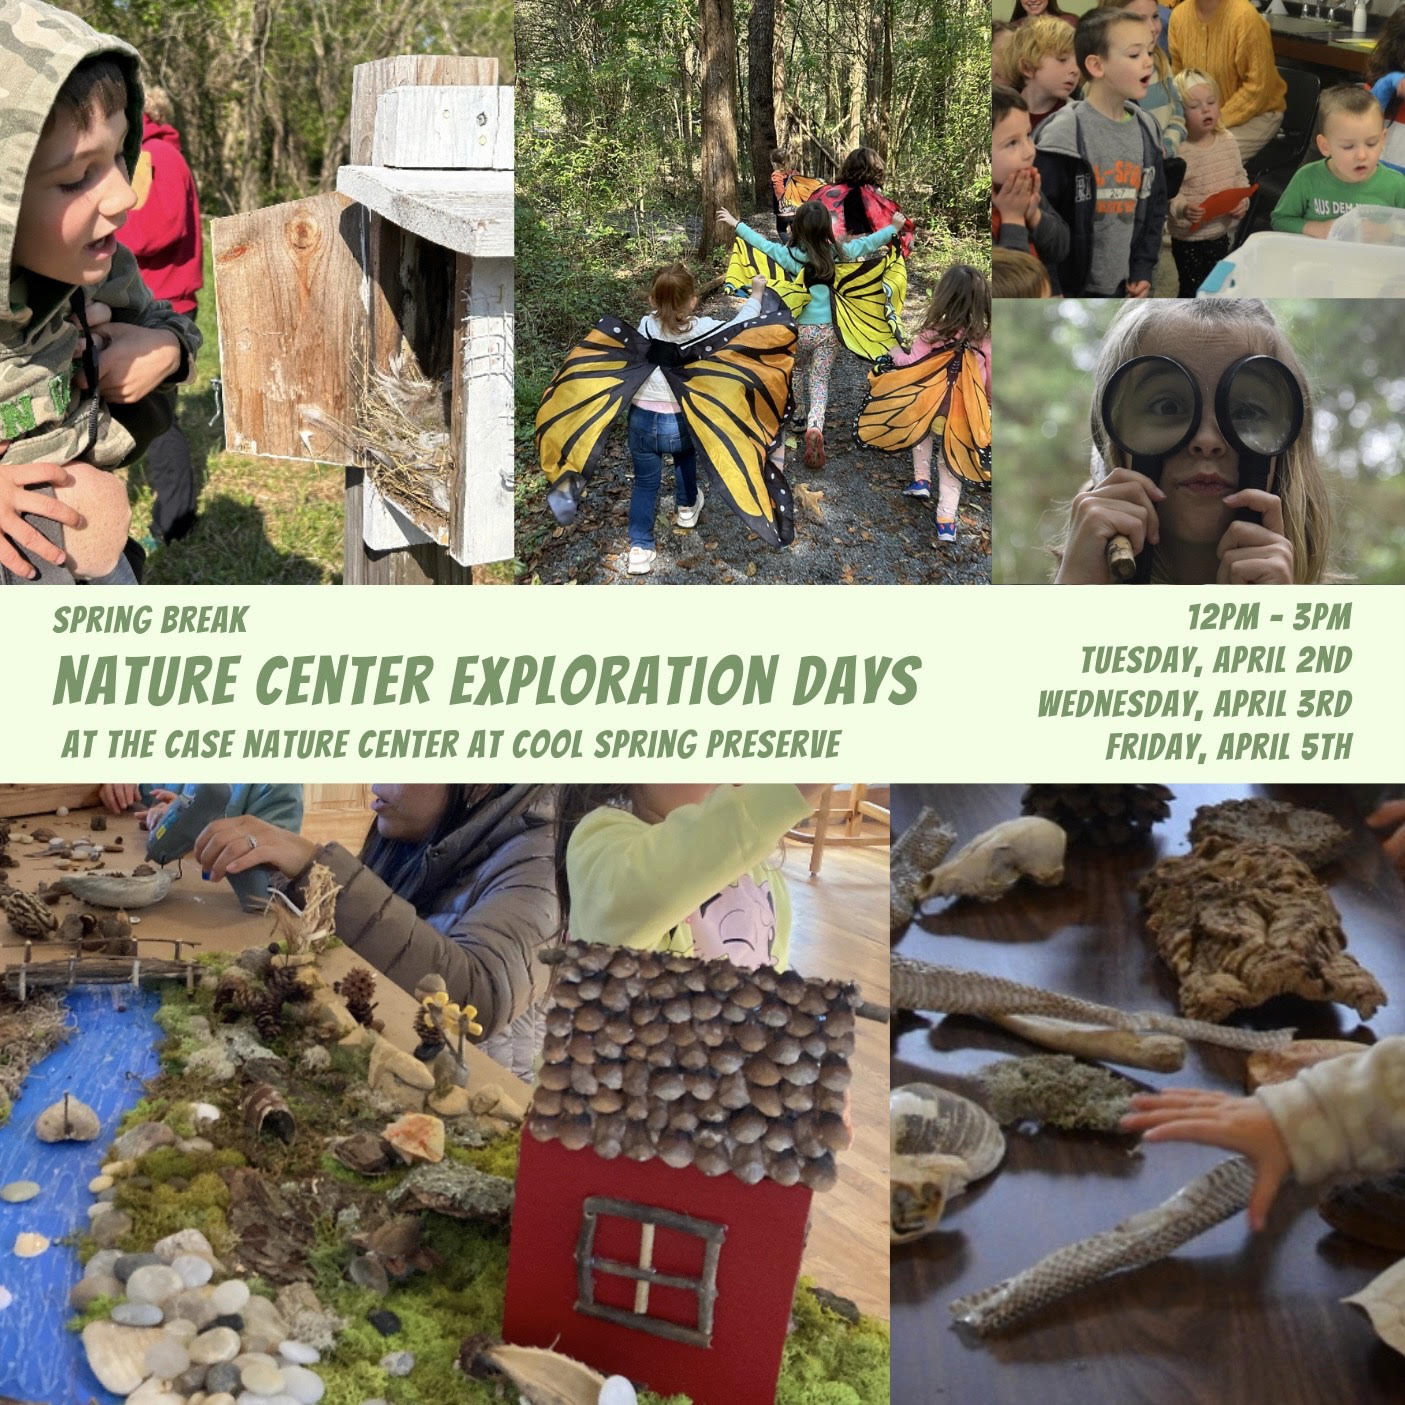 Image includes photos of kids enjoying nature and nature crafts. Text includes: Spring Break Nature Center Exploration Days at the Case Nature Center at Cool Spring Preserve, 12 PM - 3 PM, Tuesday April 2 and Wednesday April 3 and Friday April 5